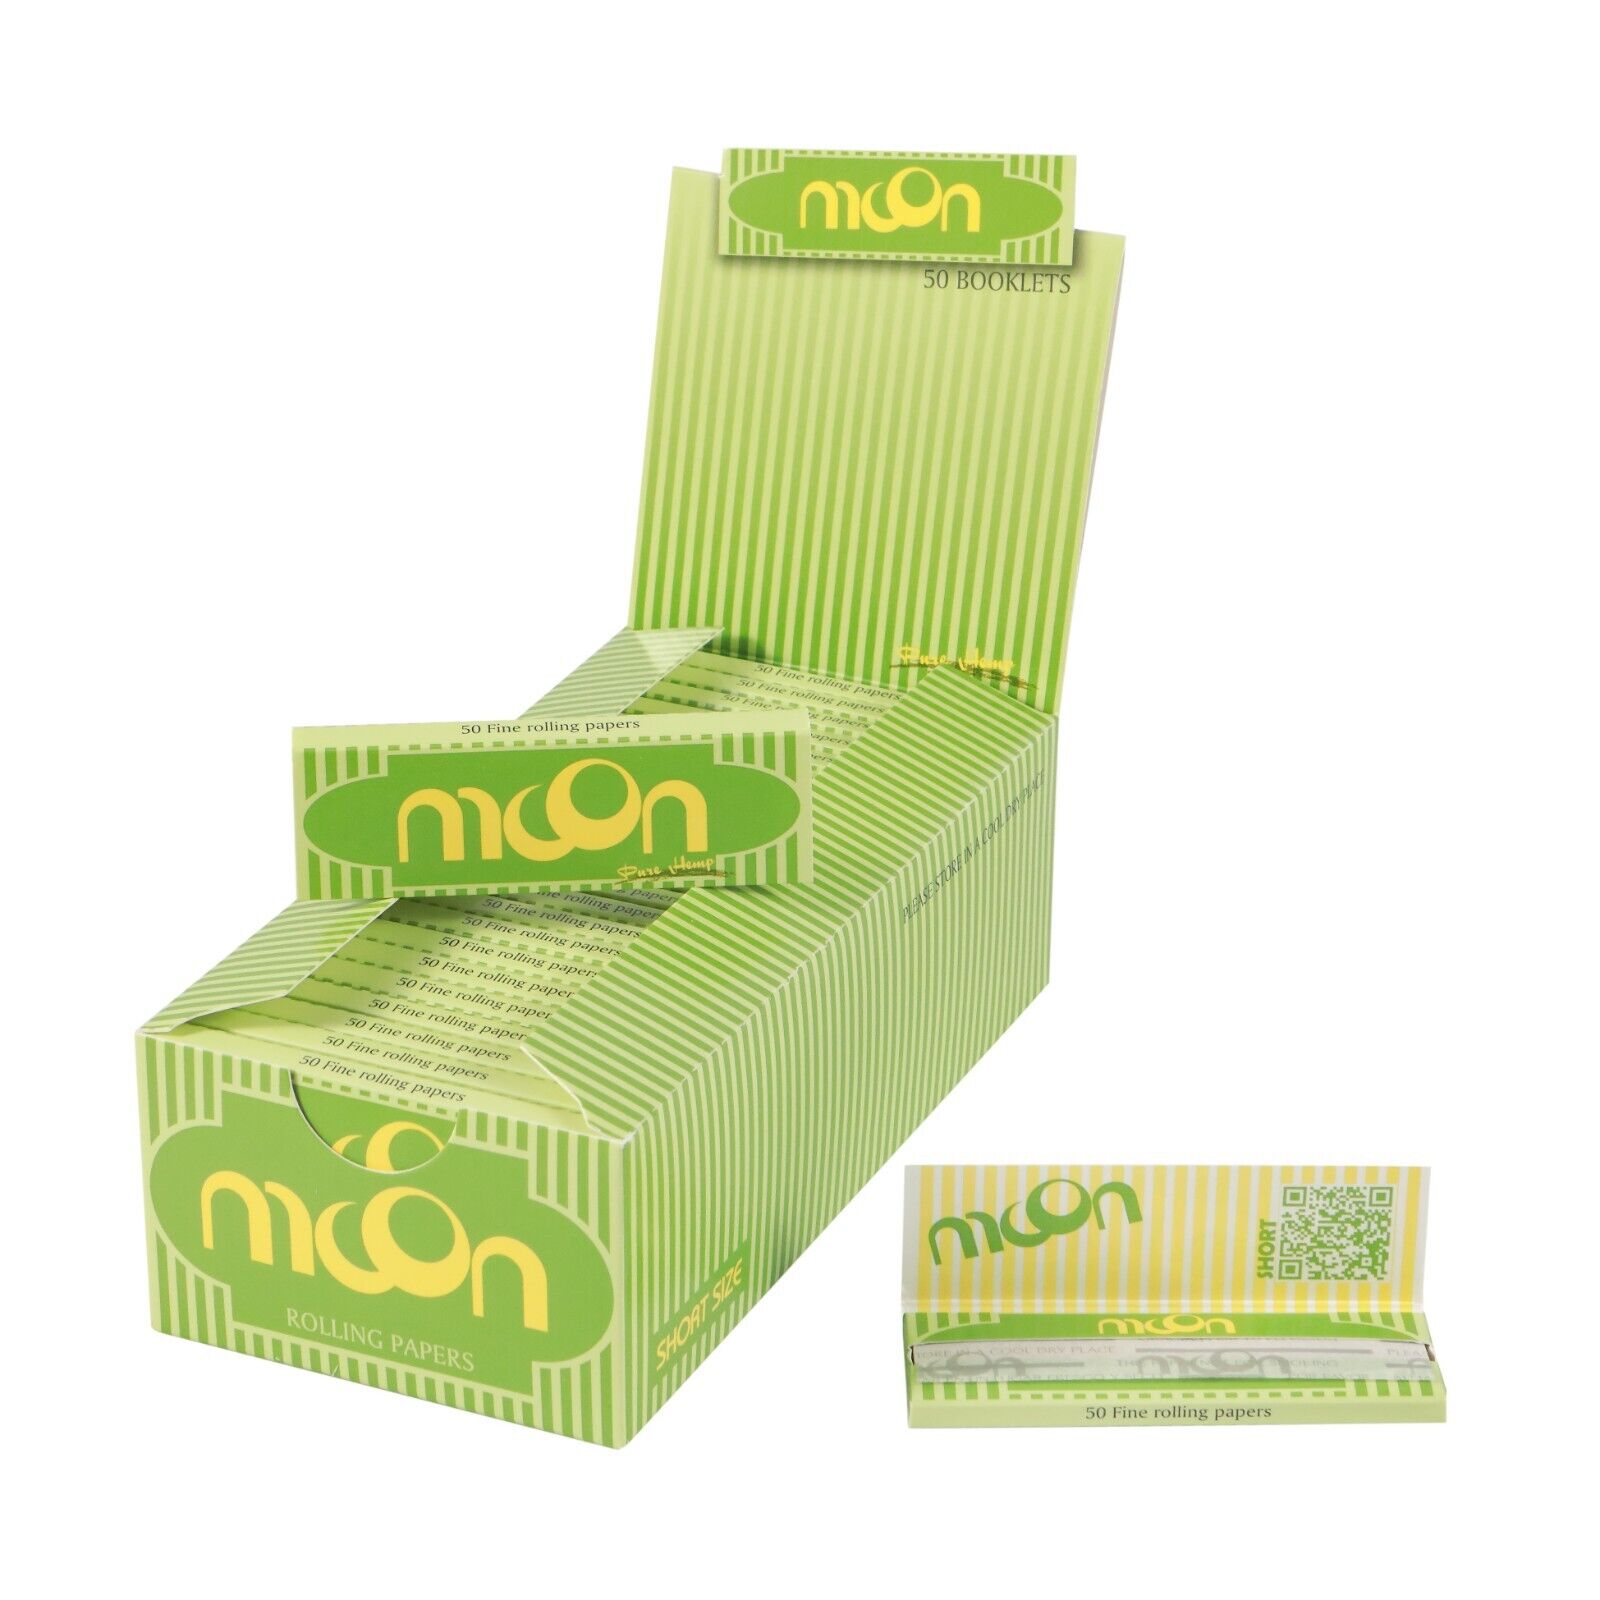 MOON 50 Booklets Pure Hemp Rolling Papers 70*36mm Short Size 2500 Leaves 1 Box